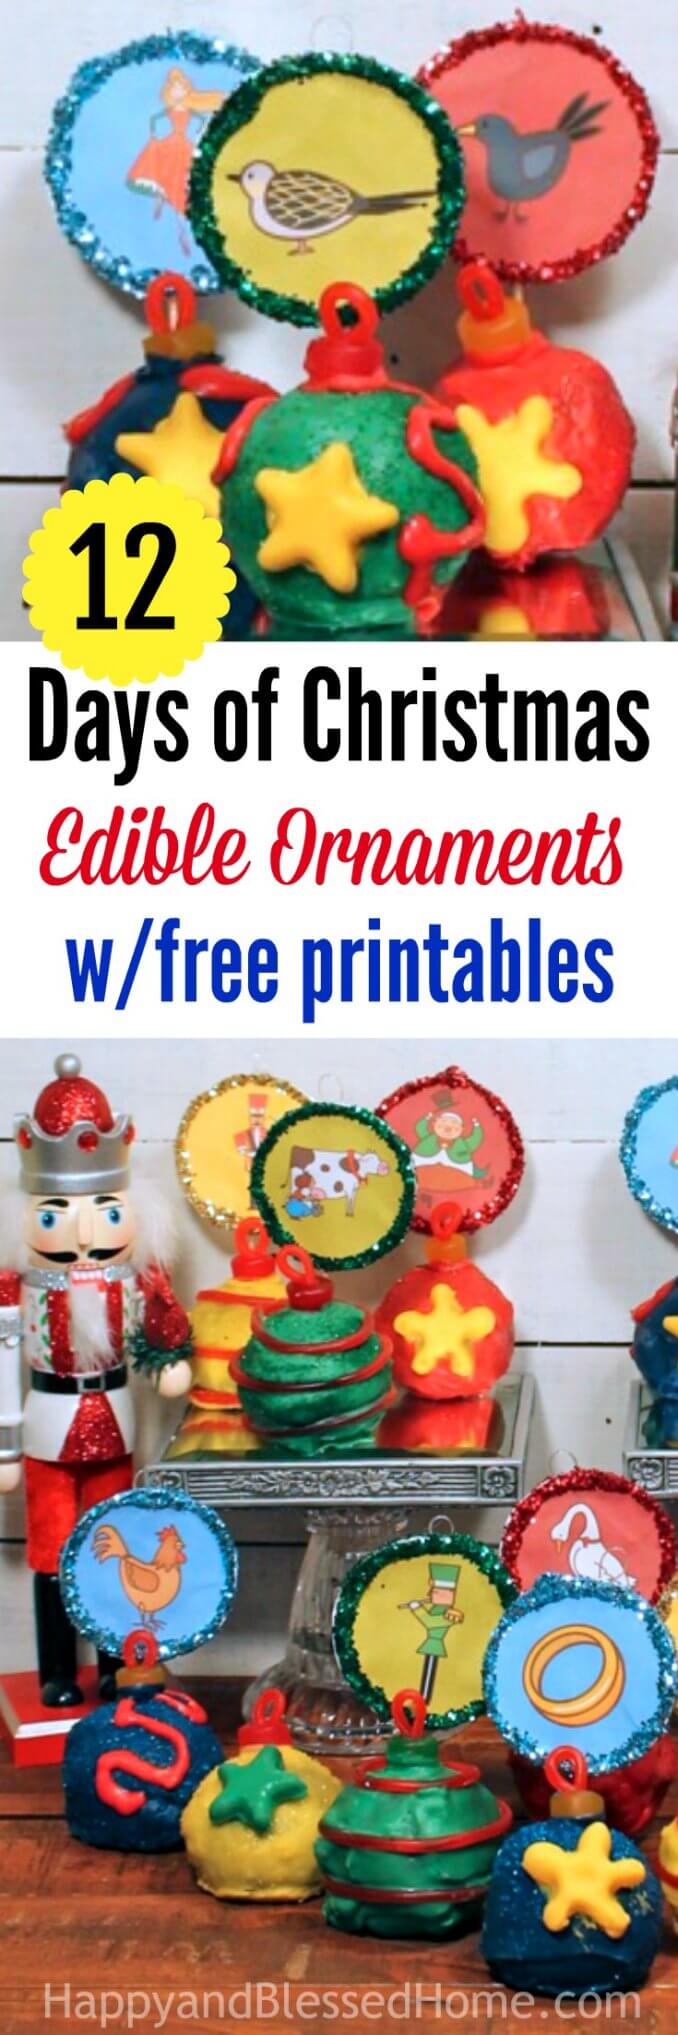 12 Days of Christmas Edible Ornaments with FREE Printables representing the song about the 12 Days of Christmas